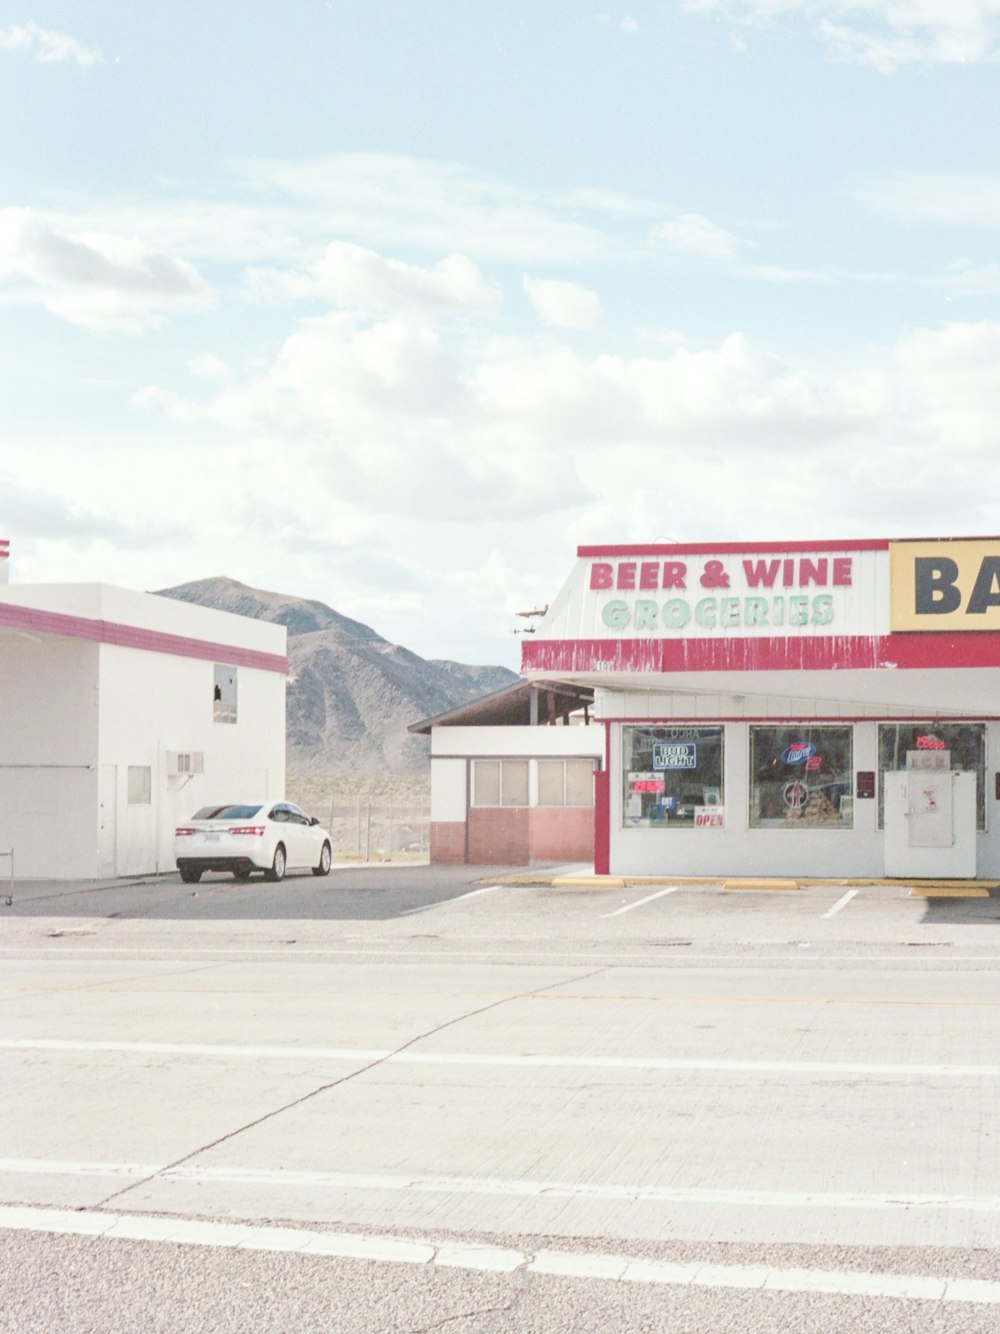 a car parked in front of a bar and wine store